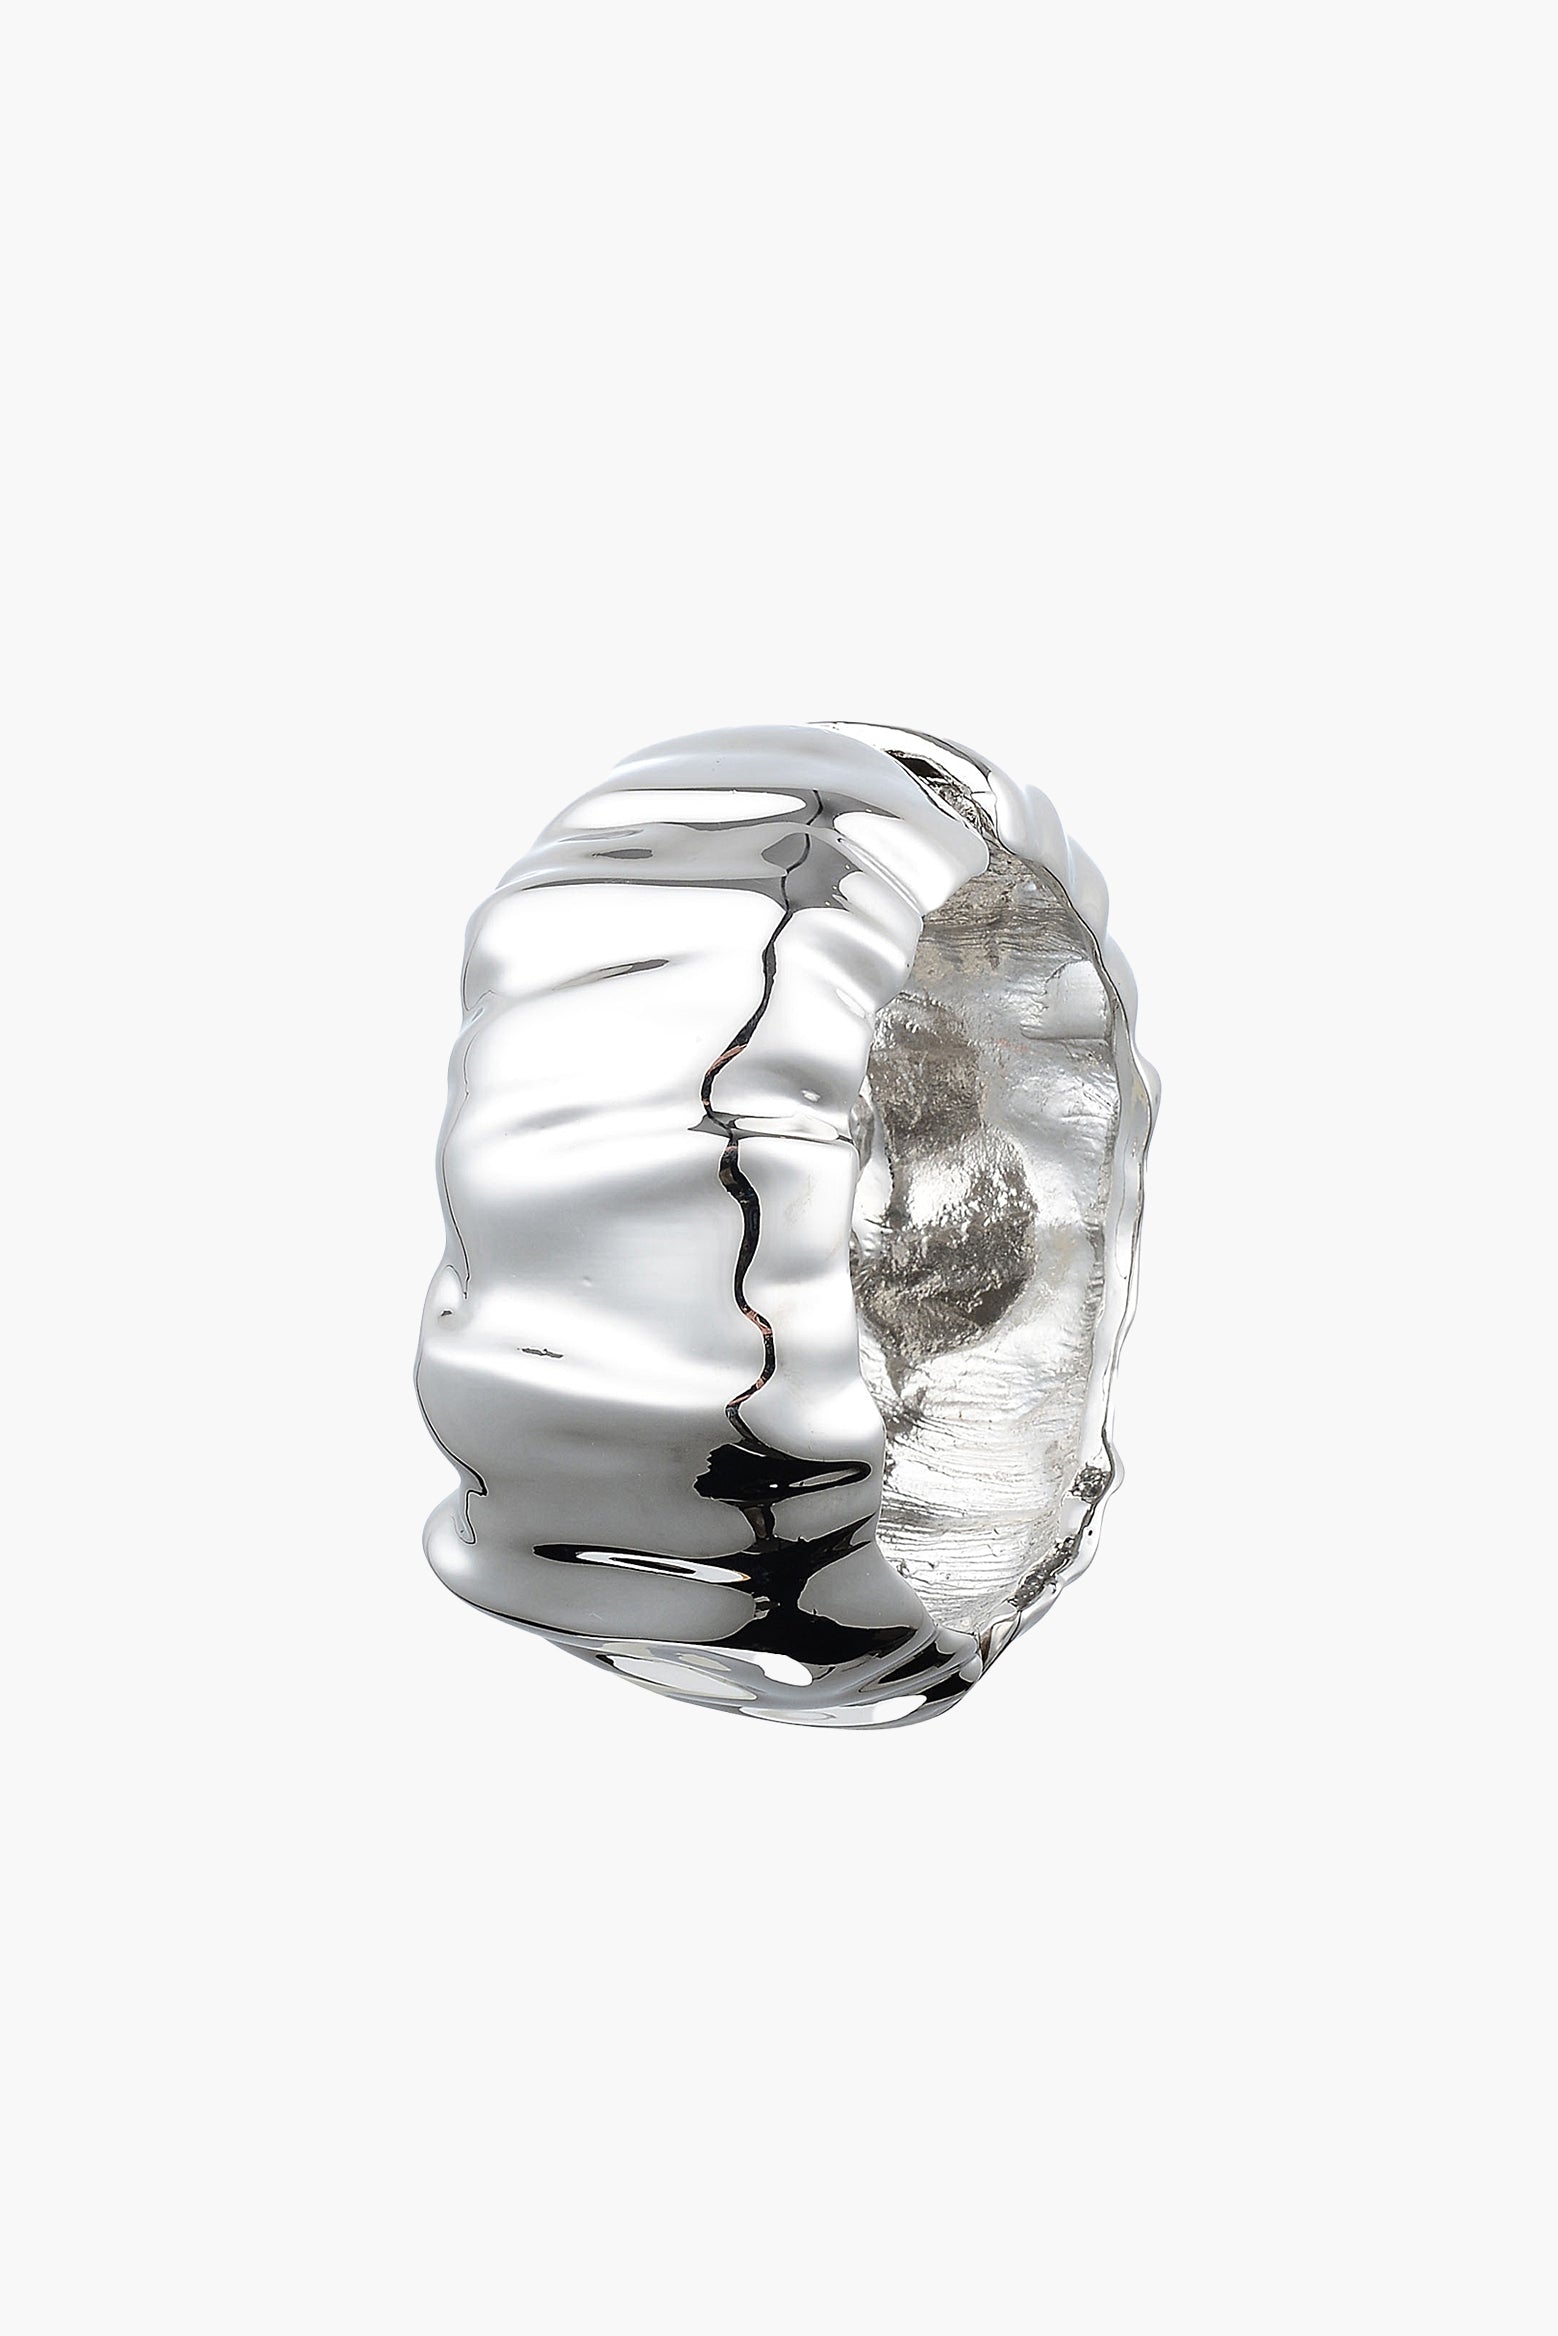 Anna Rossi Melted Bangle in Silver available at The New Trend Australia.